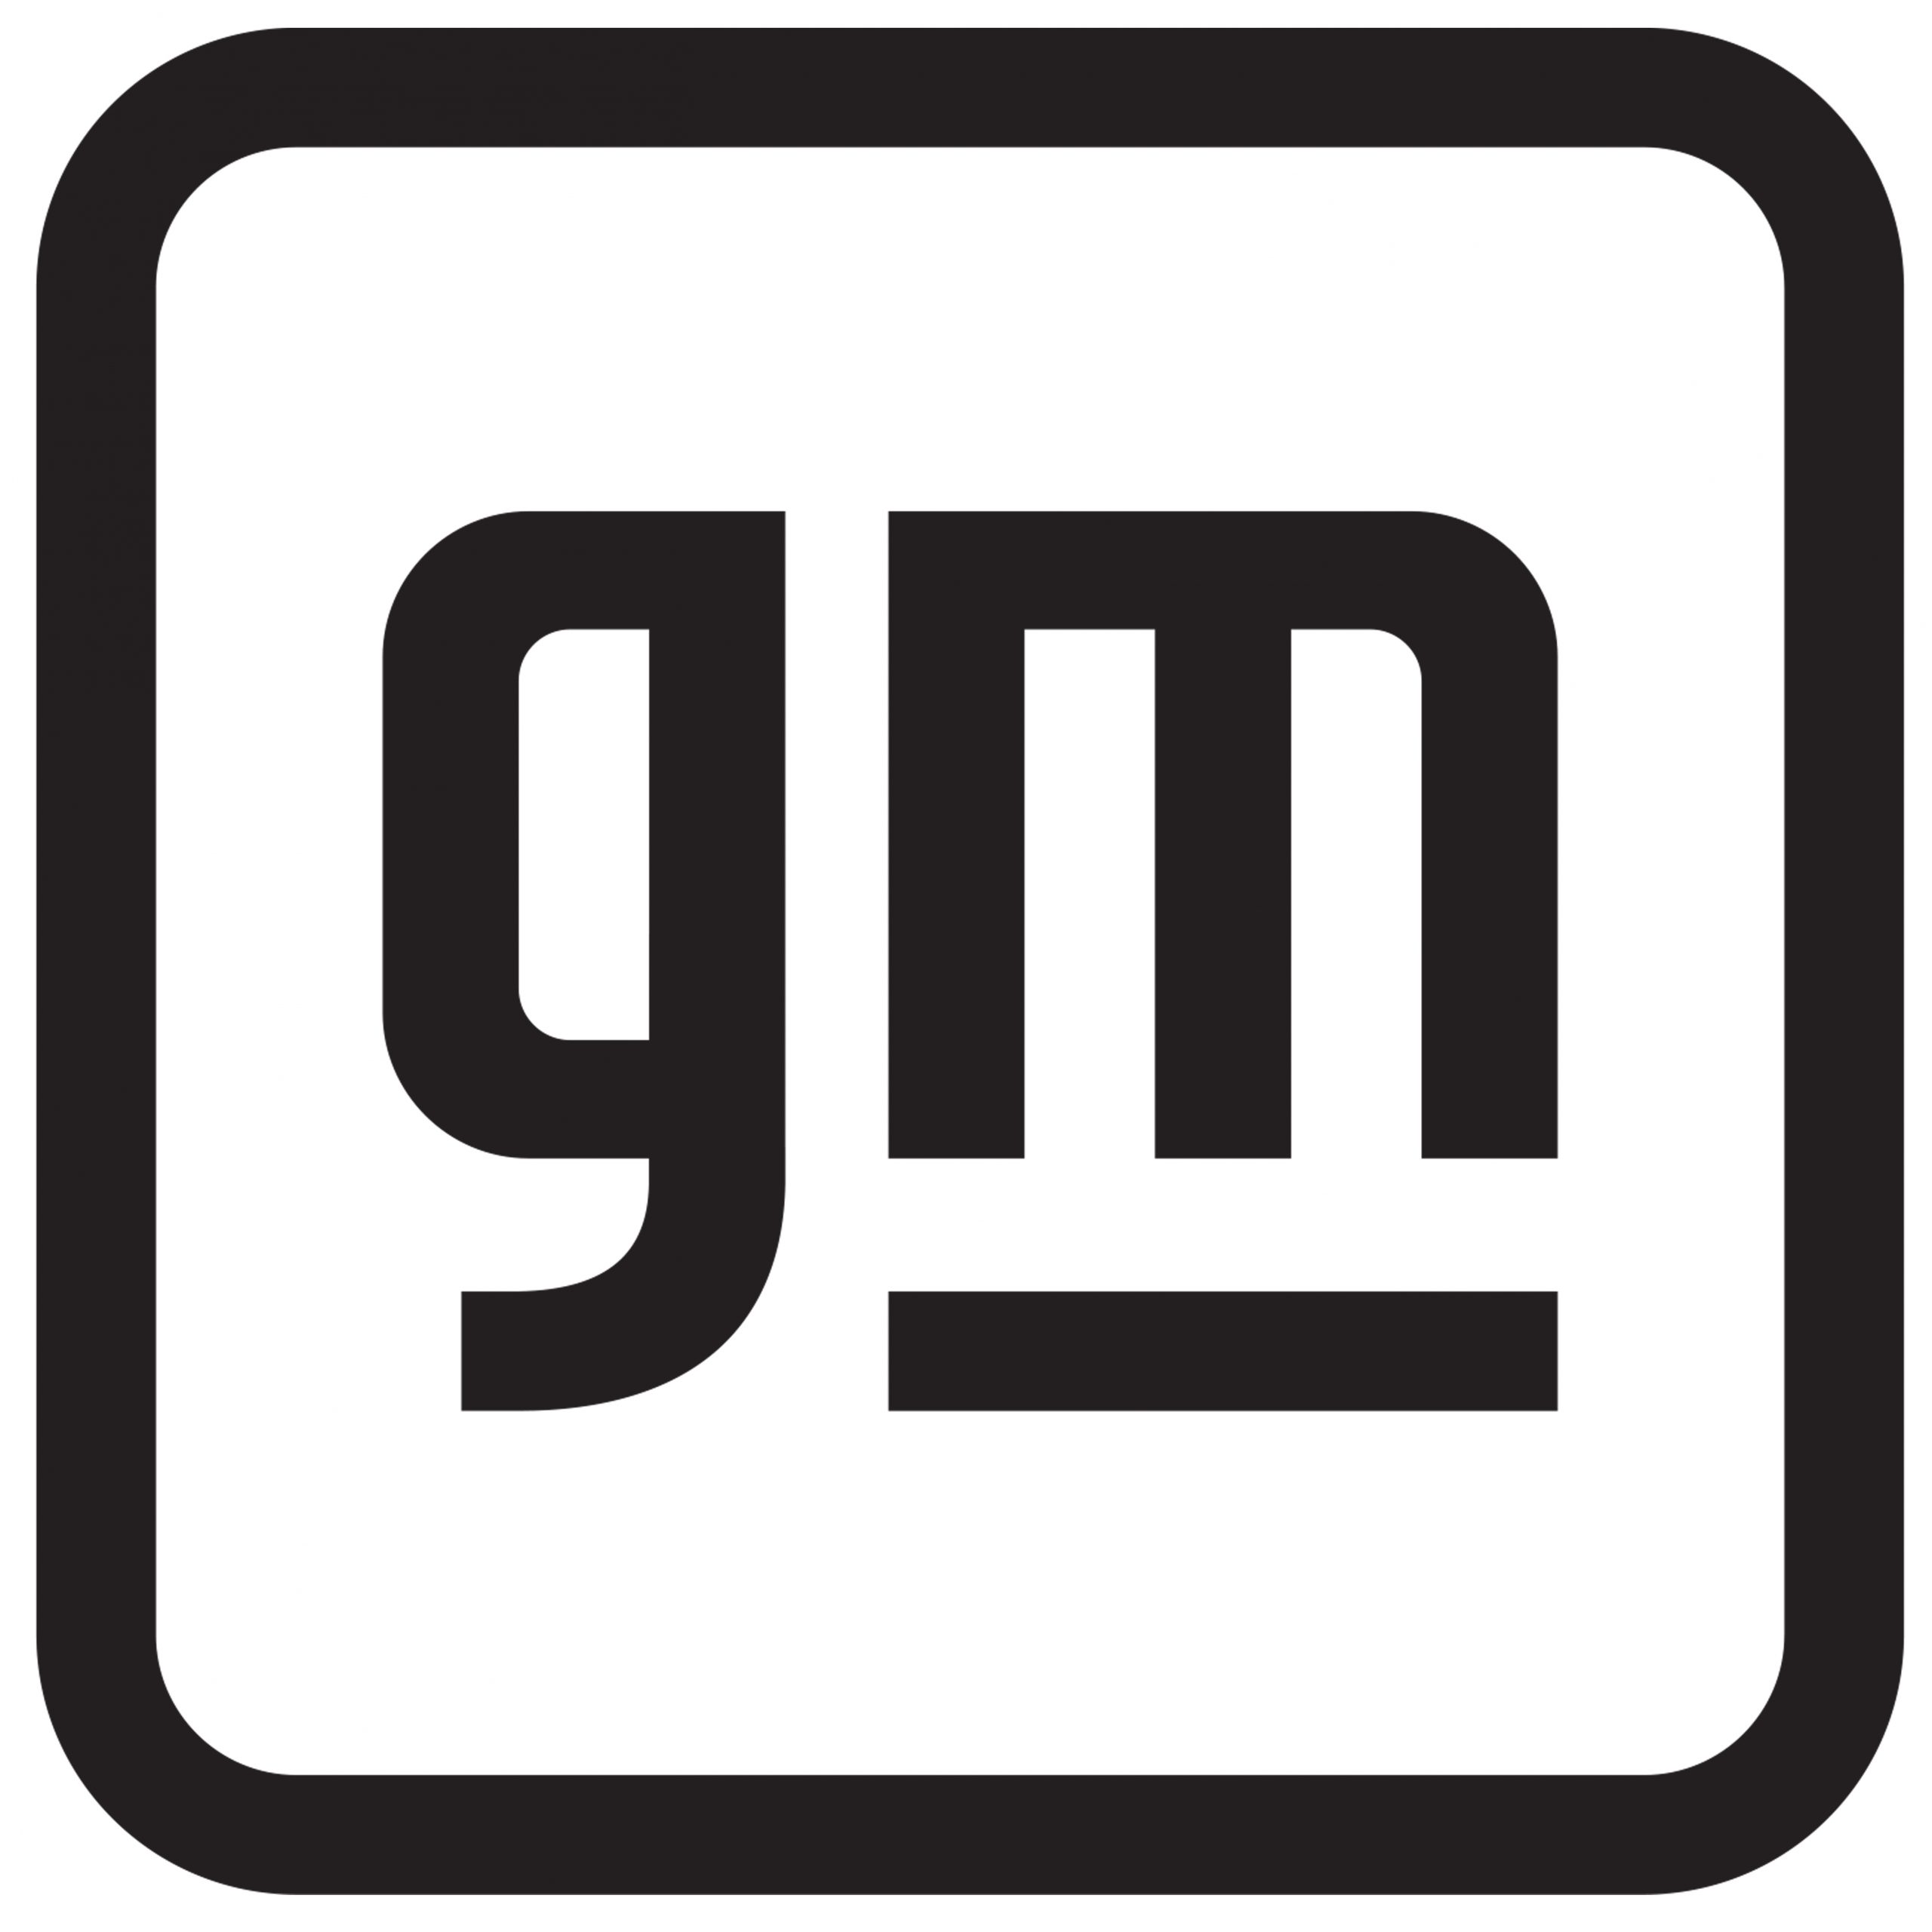 This is the new logo for GM beginning Monday, January 11, 2021